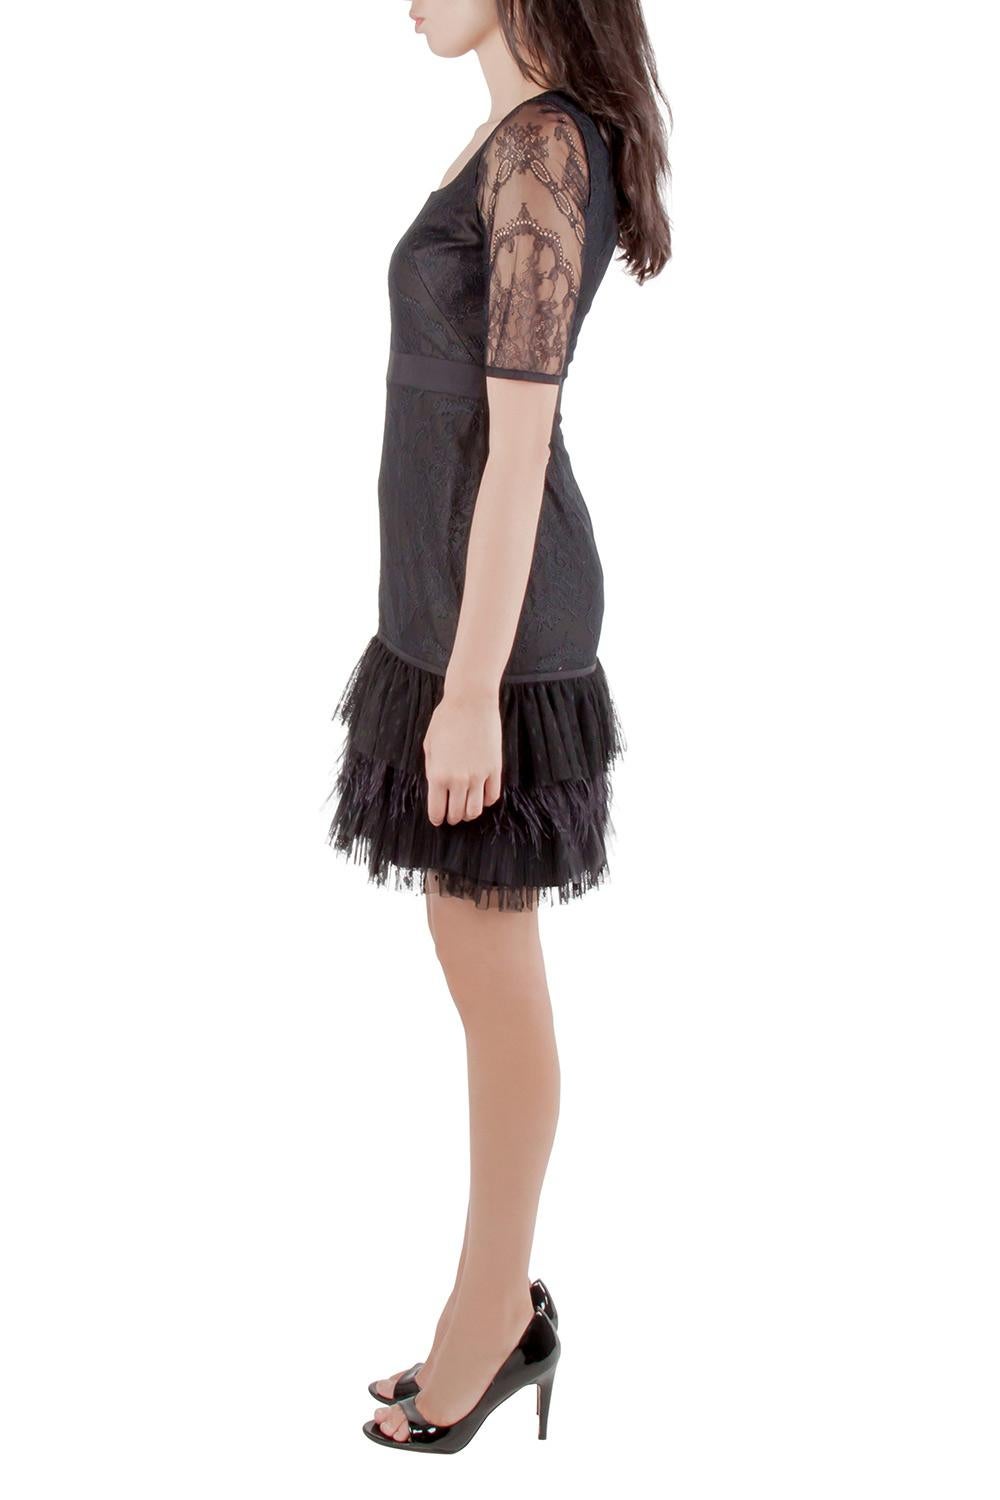 Marchesa Notte Black Lace Ruffle Tiered Hem Feather Insert Cocktail Dress M 1